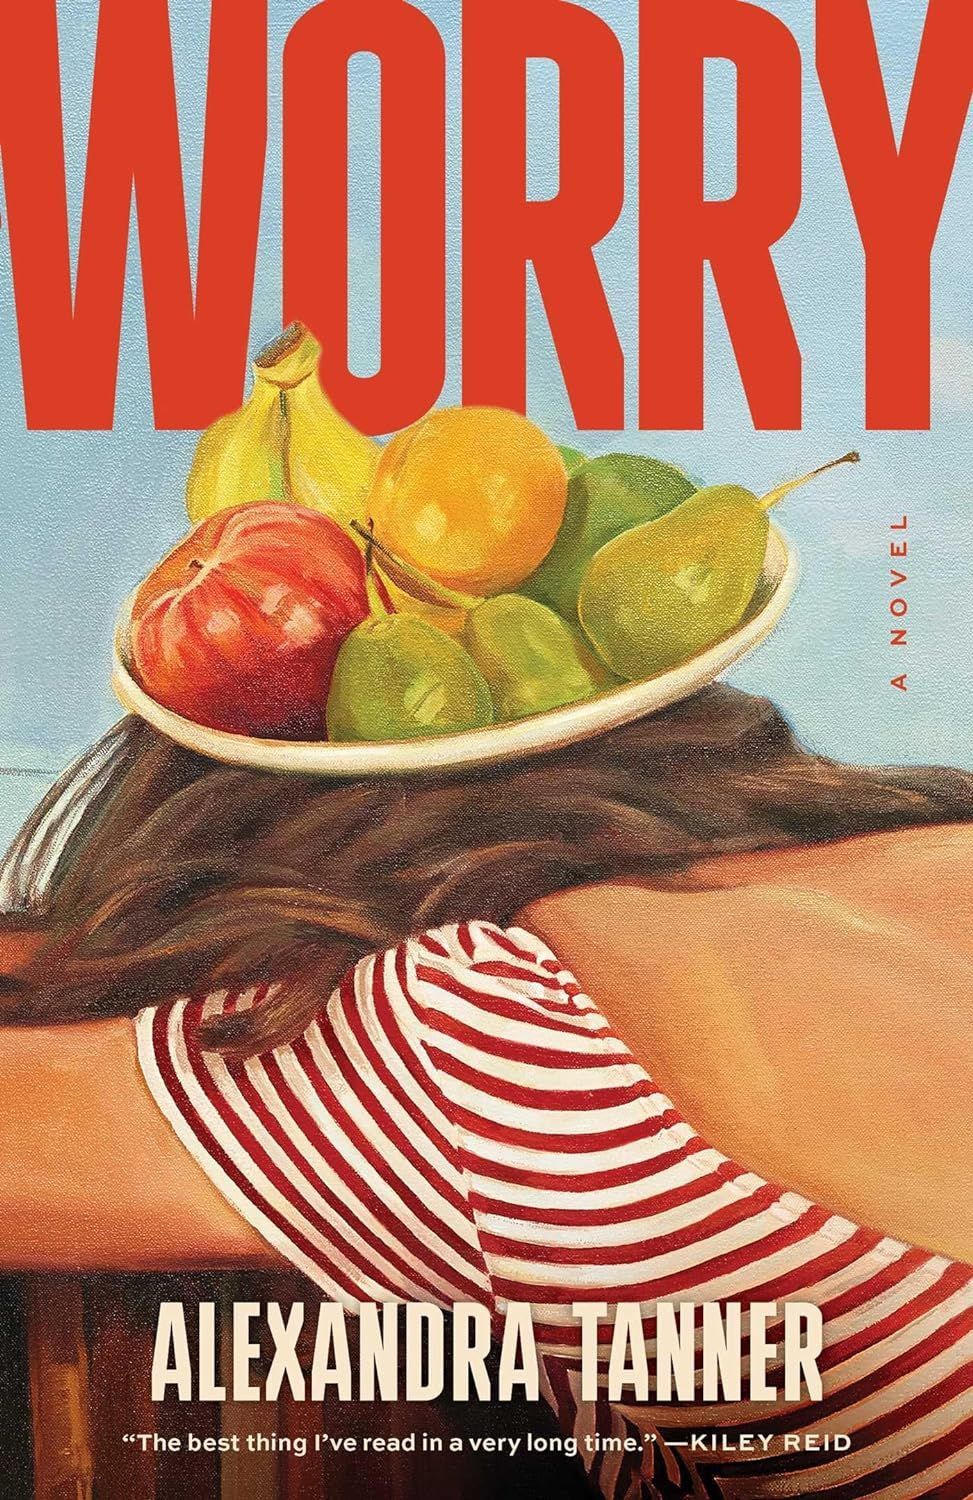 Excerpt from Alexandra Tanner’s “Worry”